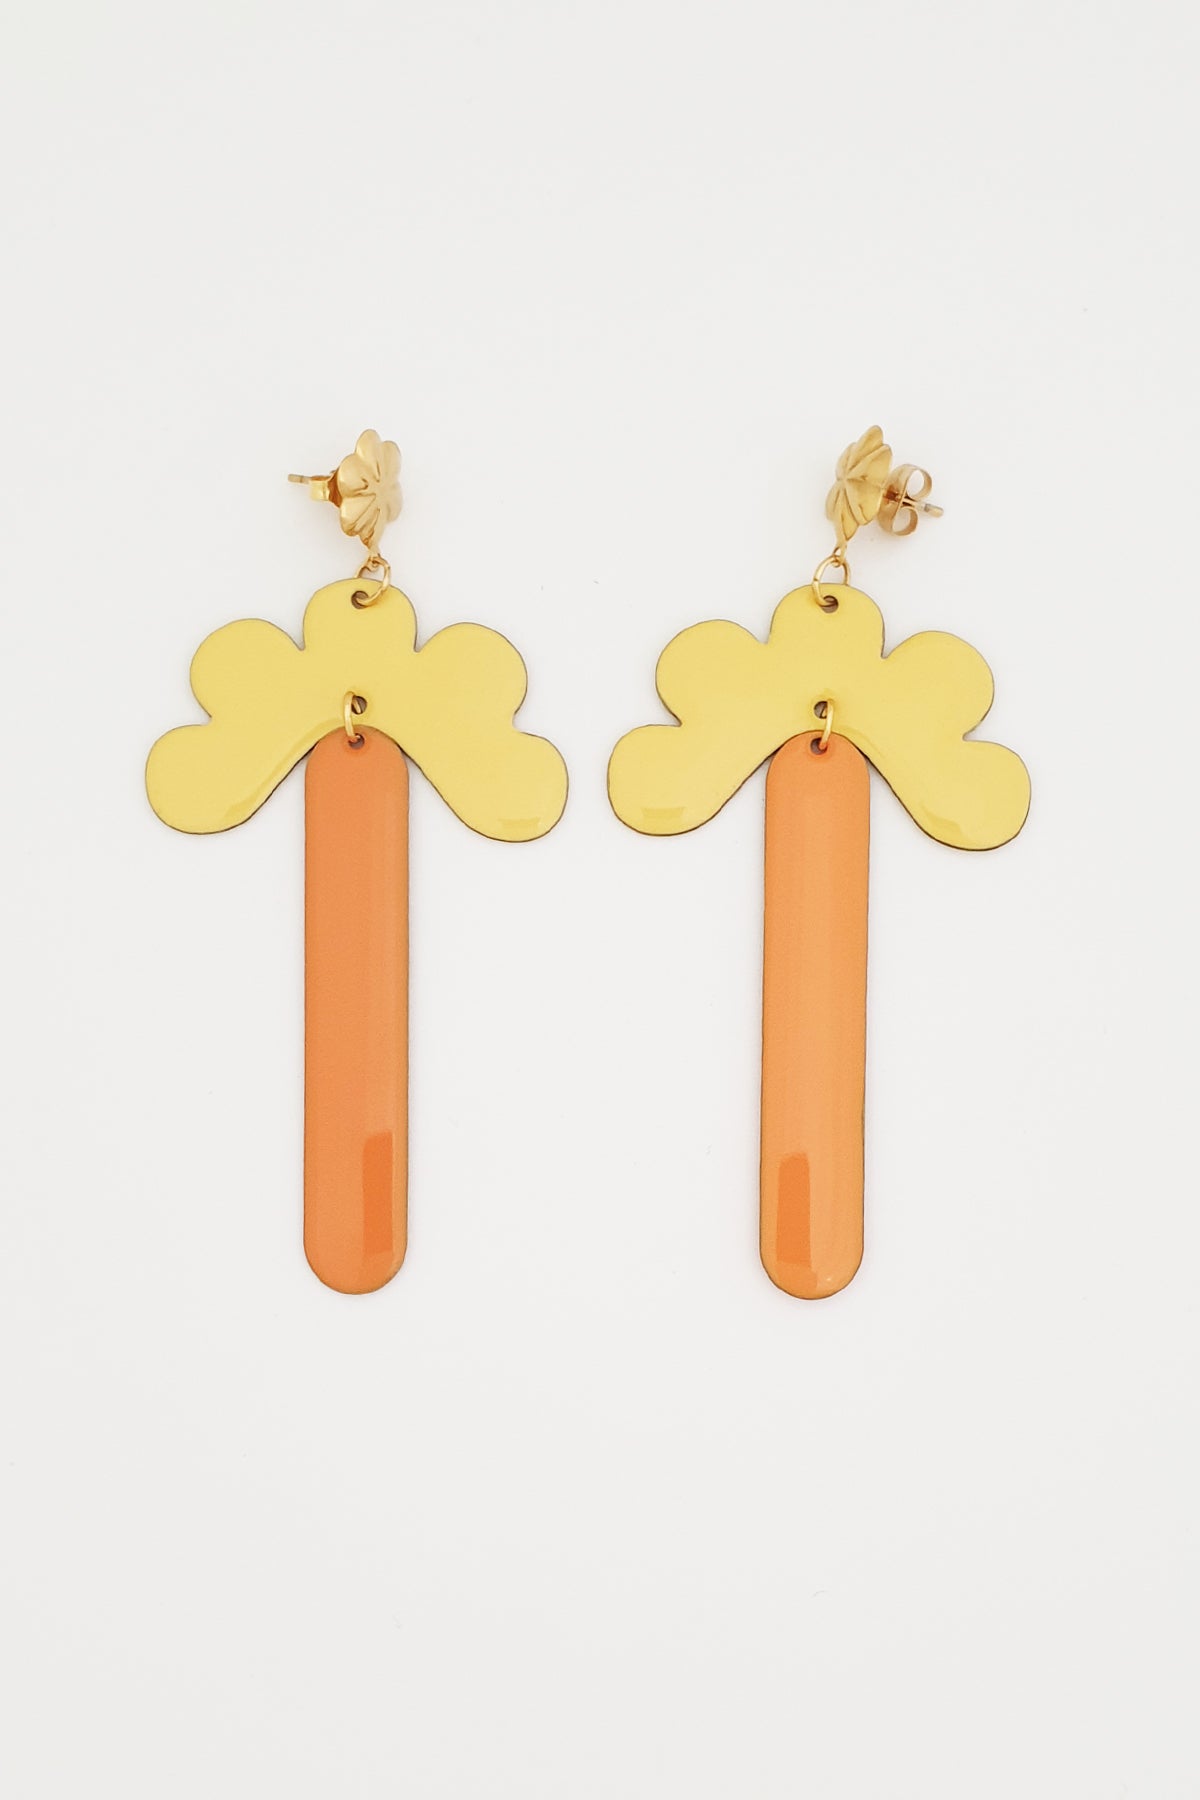 A pair of stud dangle earrings lay against a white background. They feature a gold flower shaped stud top, a yellow enamel connector piece with resemblance to a half flower, and an orange enamel drop.